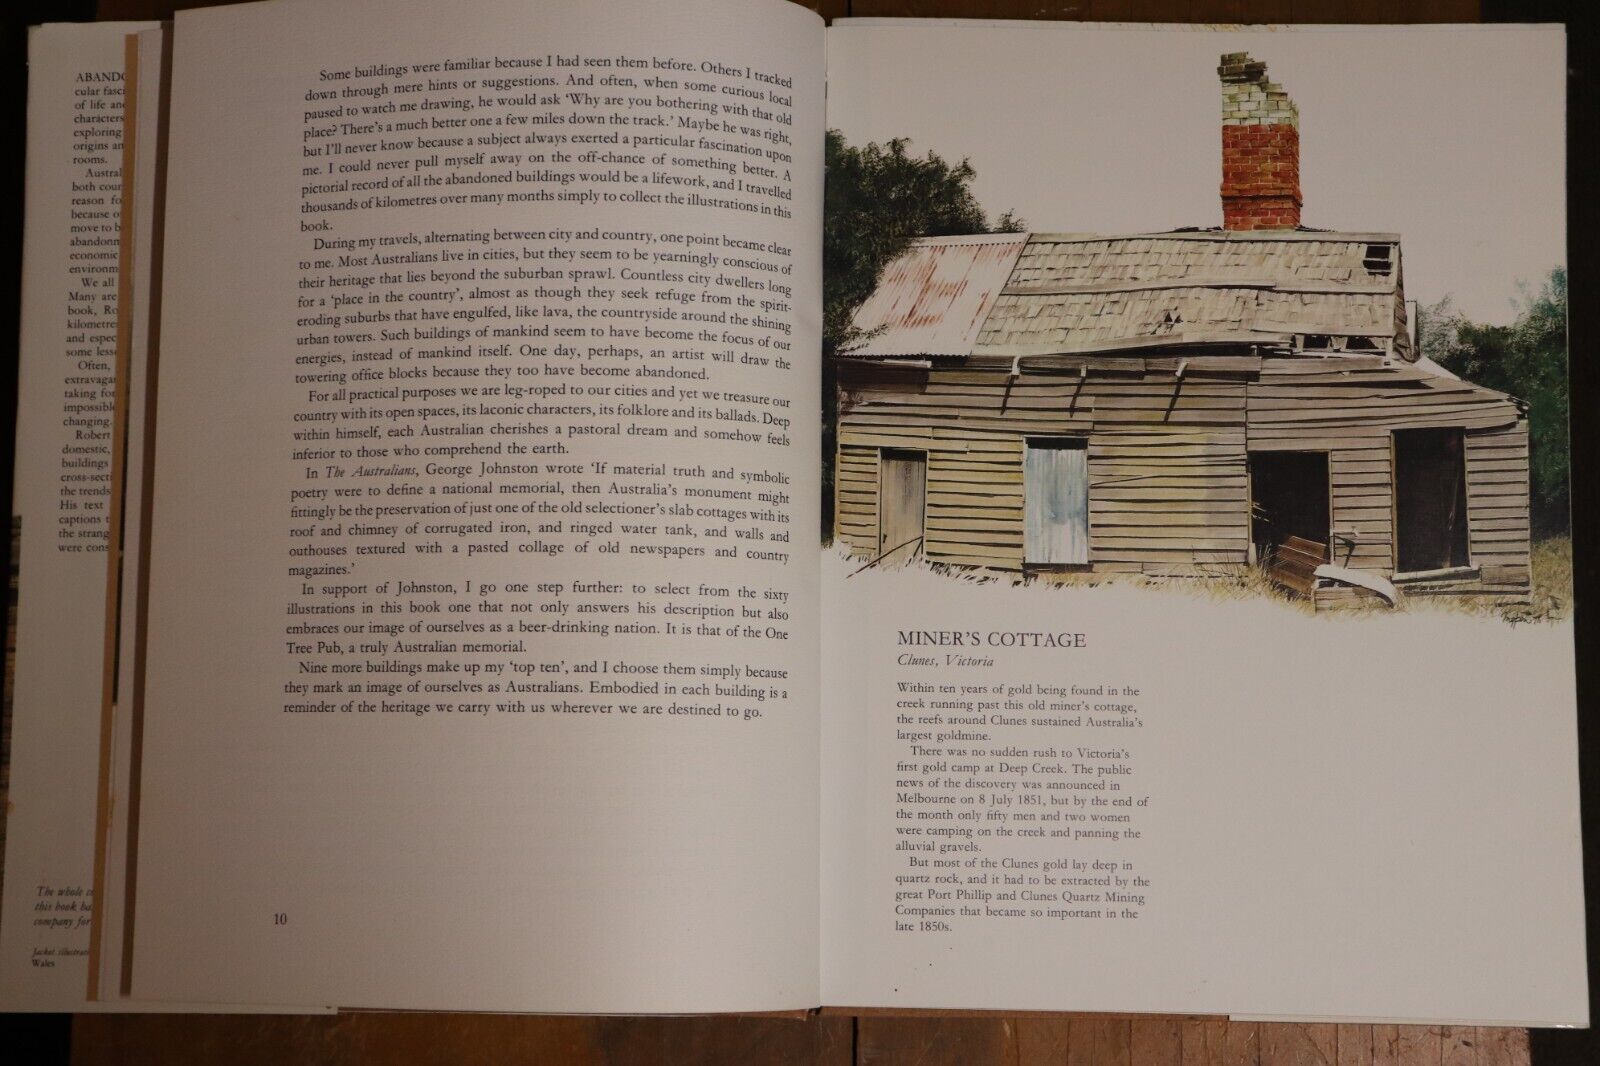 Marking Time. Australia's Abandoned Buildings - 1979 - History Book